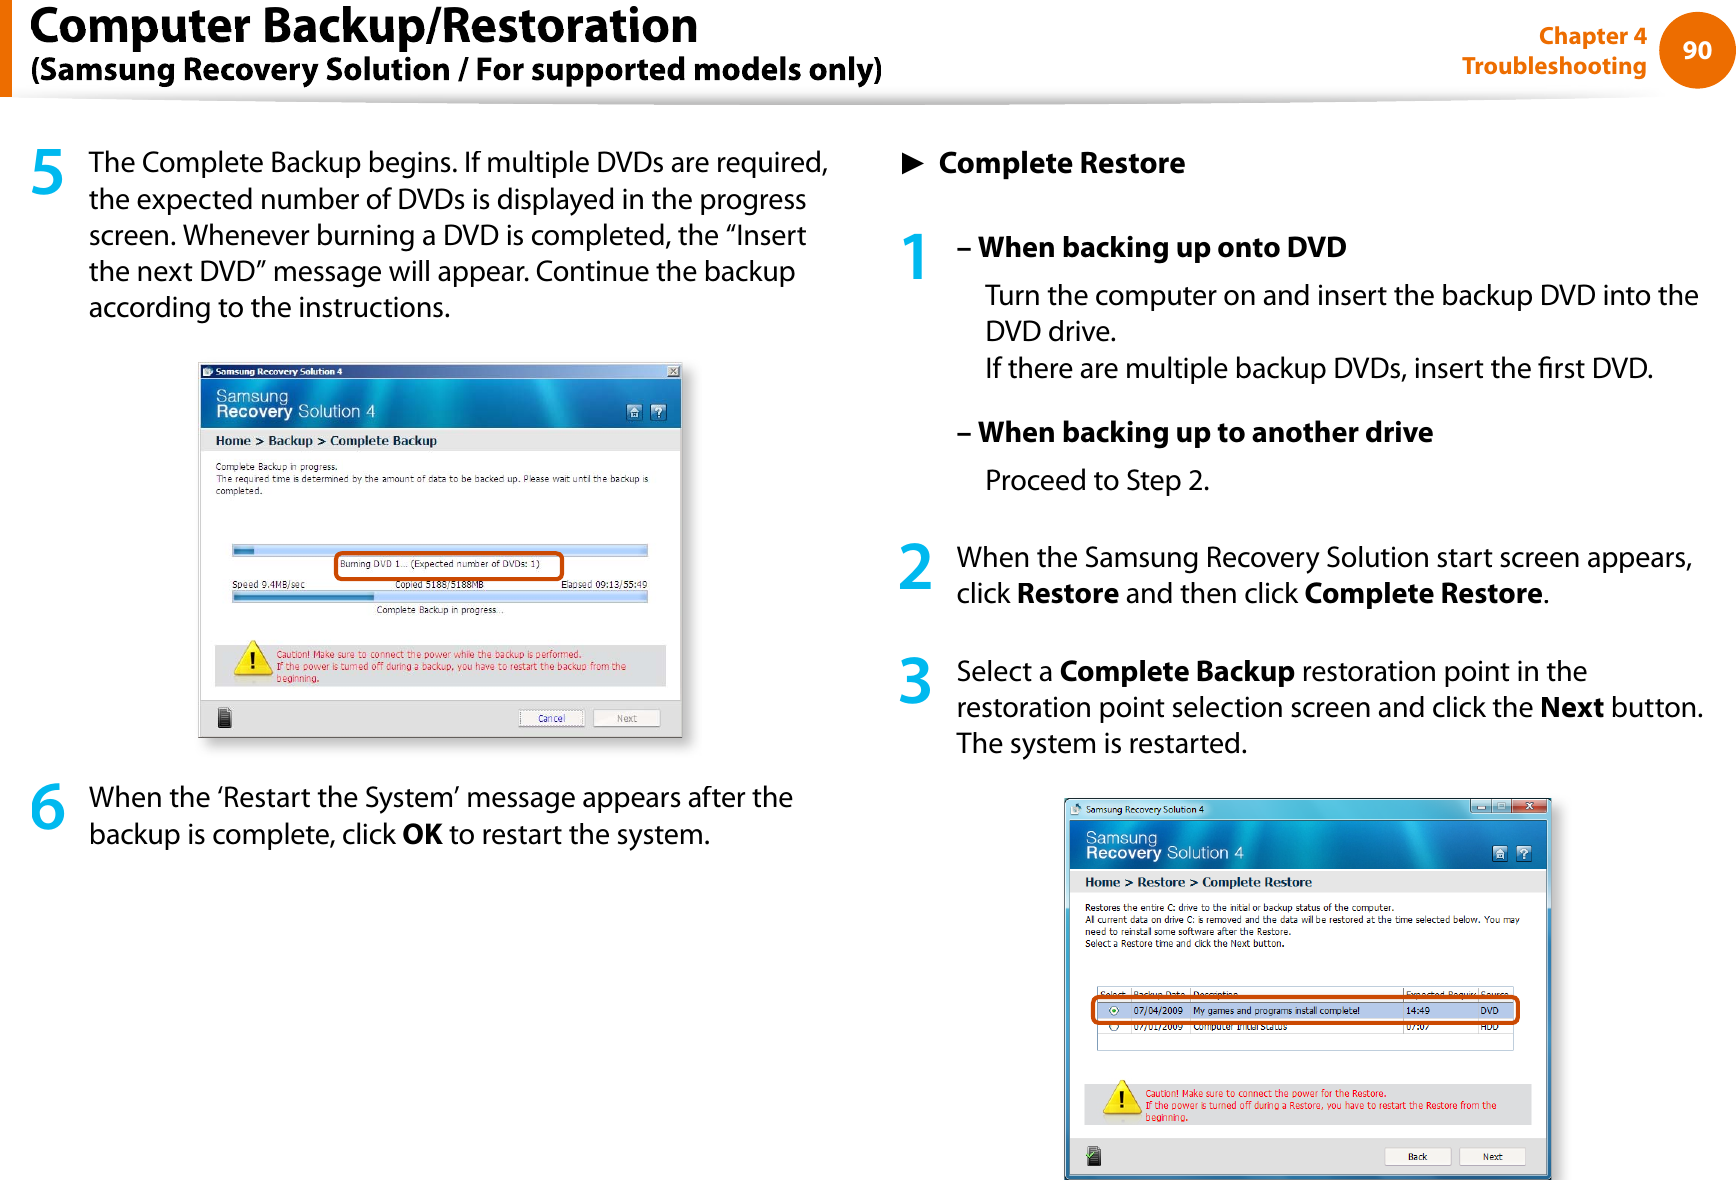 90Chapter 4Troubleshooting5The Complete Backup begins. If multiple DVDs are required,the expected number of DVDs is displayed in the progressscreen. Whenever burning a DVD is completed, the “Insertthe next DVD” message will appear. Continue the backupaccording to the instructions.6When the ‘Restart the System’ message appears after thebackup is complete, click OK to restart the system.KŹComplete Restore1– When backing up onto DVDTurn the computer on and insert the backup DVD into theDVD drive.If there are multiple backup DVDs, insert the rst DVD.– When backing up to another driveProceed to Step 2.2When the Samsung Recovery Solution start screen appears,click Restore and then click Complete Restore.3Select a Complete Backup restoration point in therestoration point selection screen and click theNext button.The system is restarted.Computer Backup/Restoration